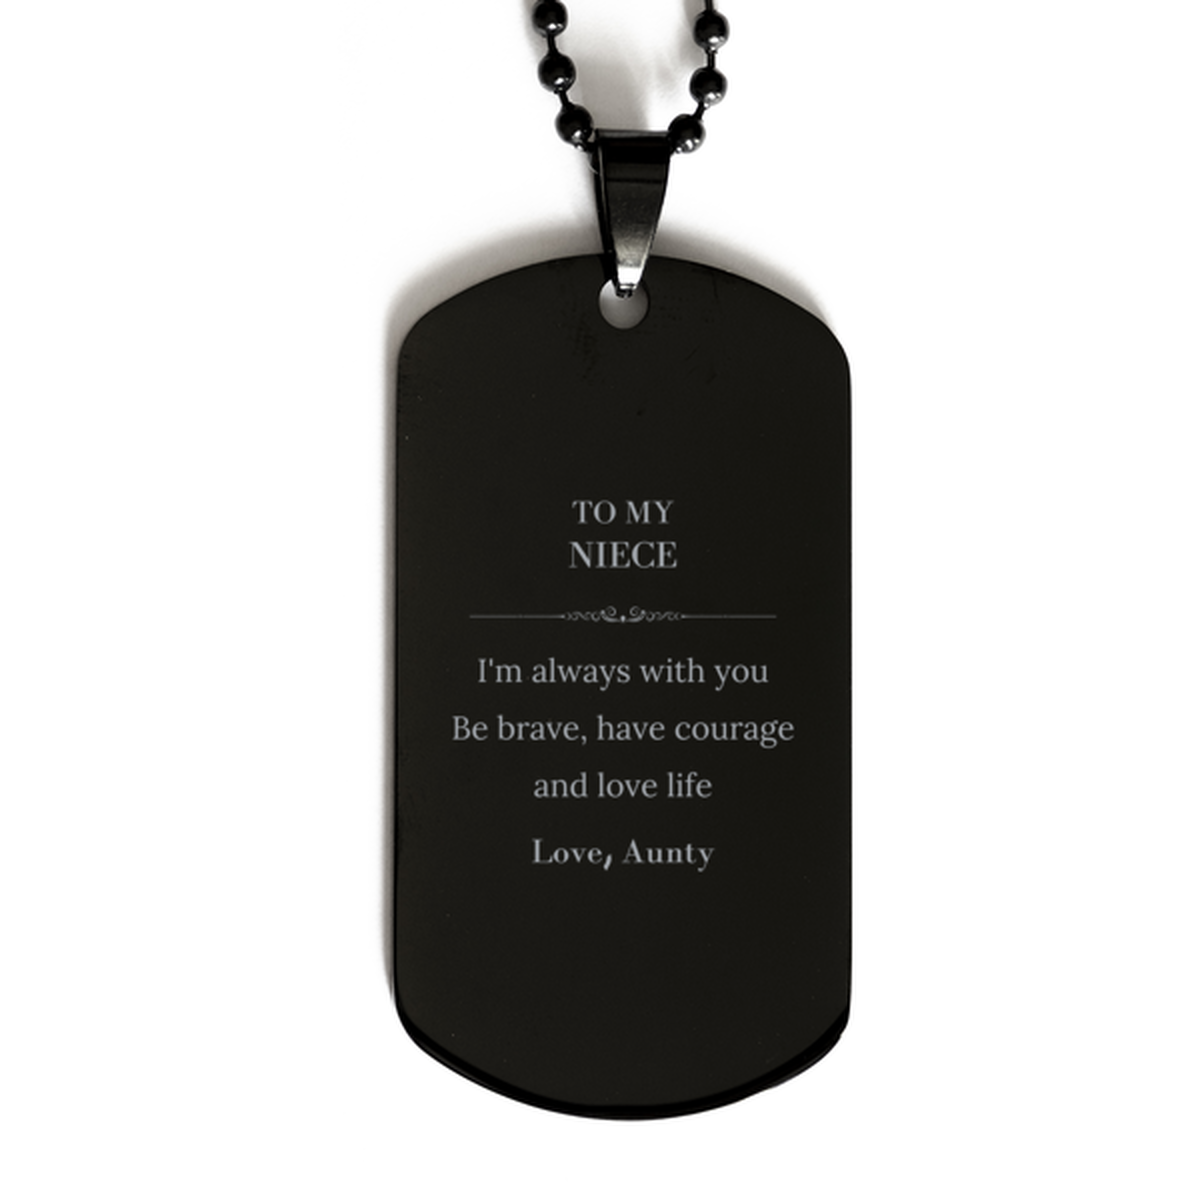 To My Niece Gifts from Aunty, Unique Black Dog Tag Inspirational Christmas Birthday Graduation Gifts for Niece I'm always with you. Be brave, have courage and love life. Love, Aunty